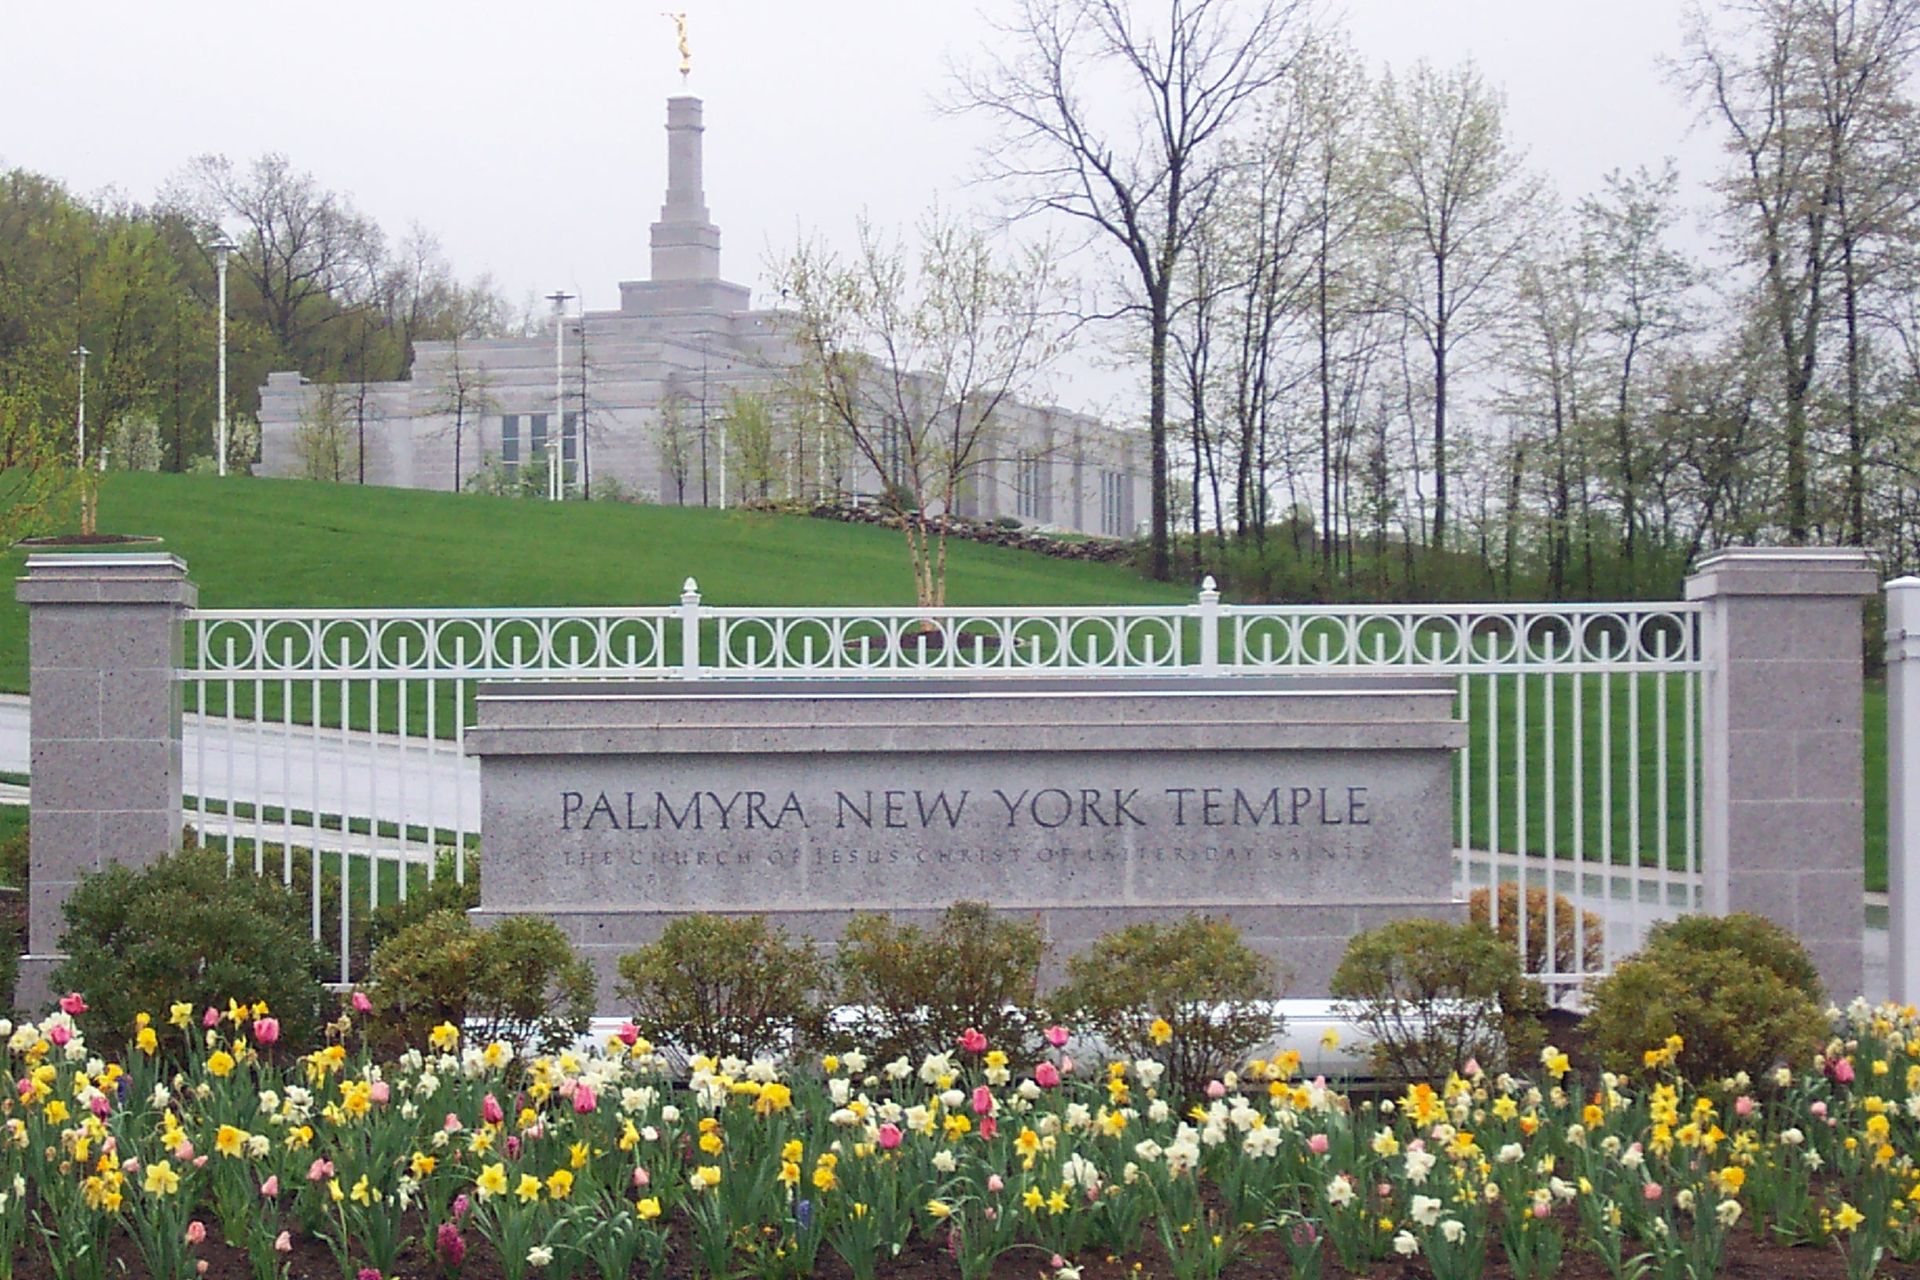 The Palmyra New York Temple name sign, including scenery and the temple exterior.